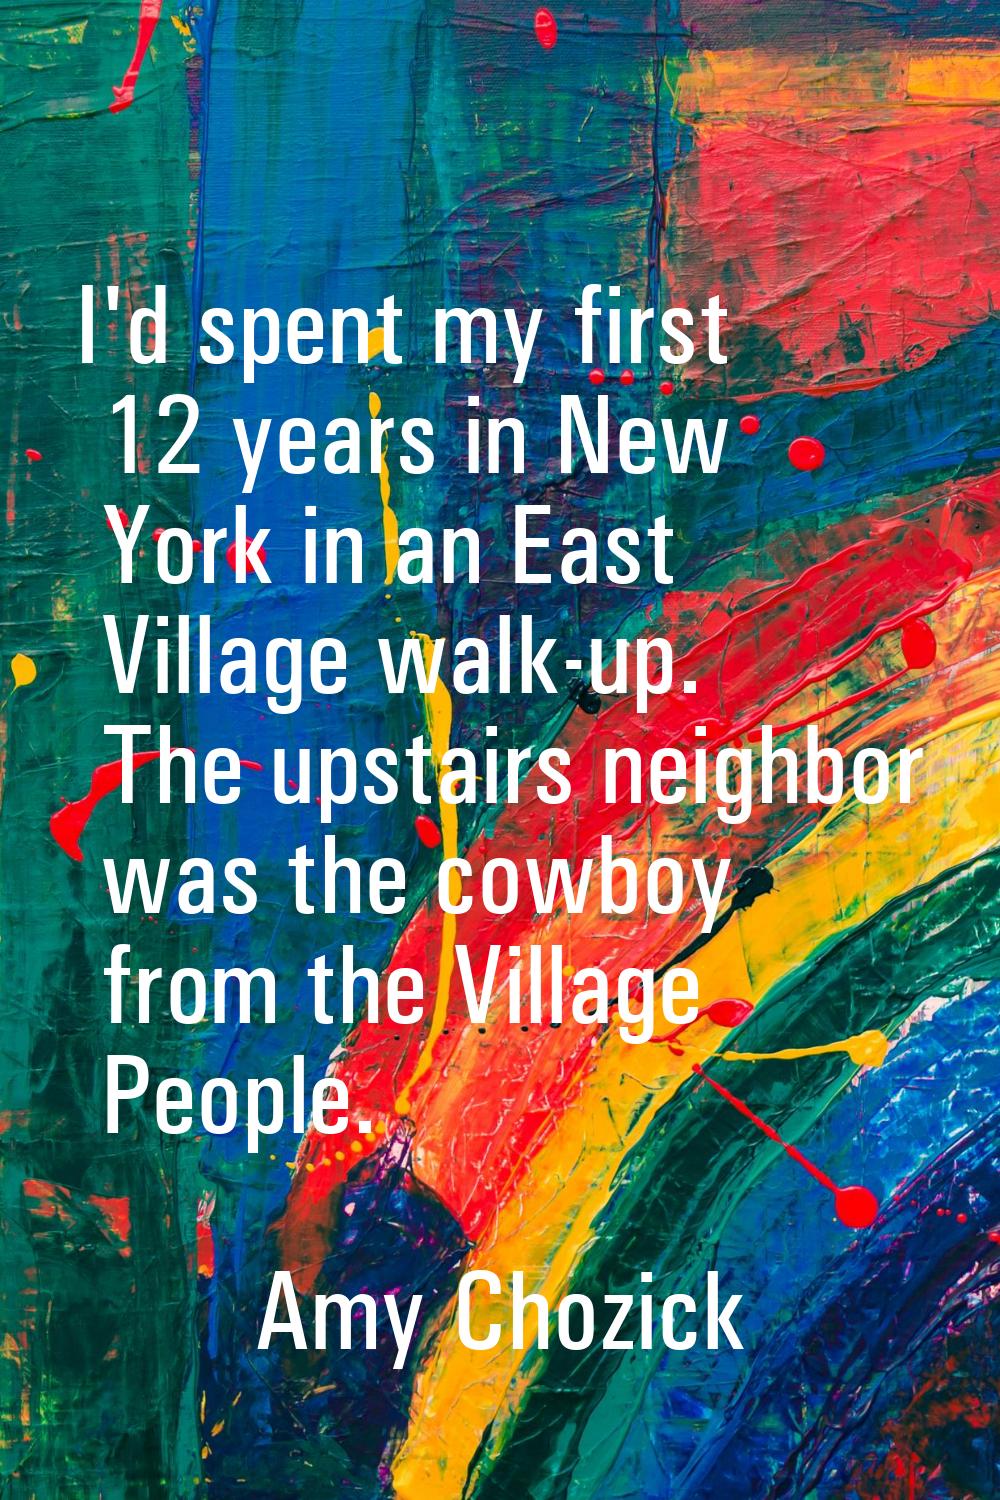 I'd spent my first 12 years in New York in an East Village walk-up. The upstairs neighbor was the c